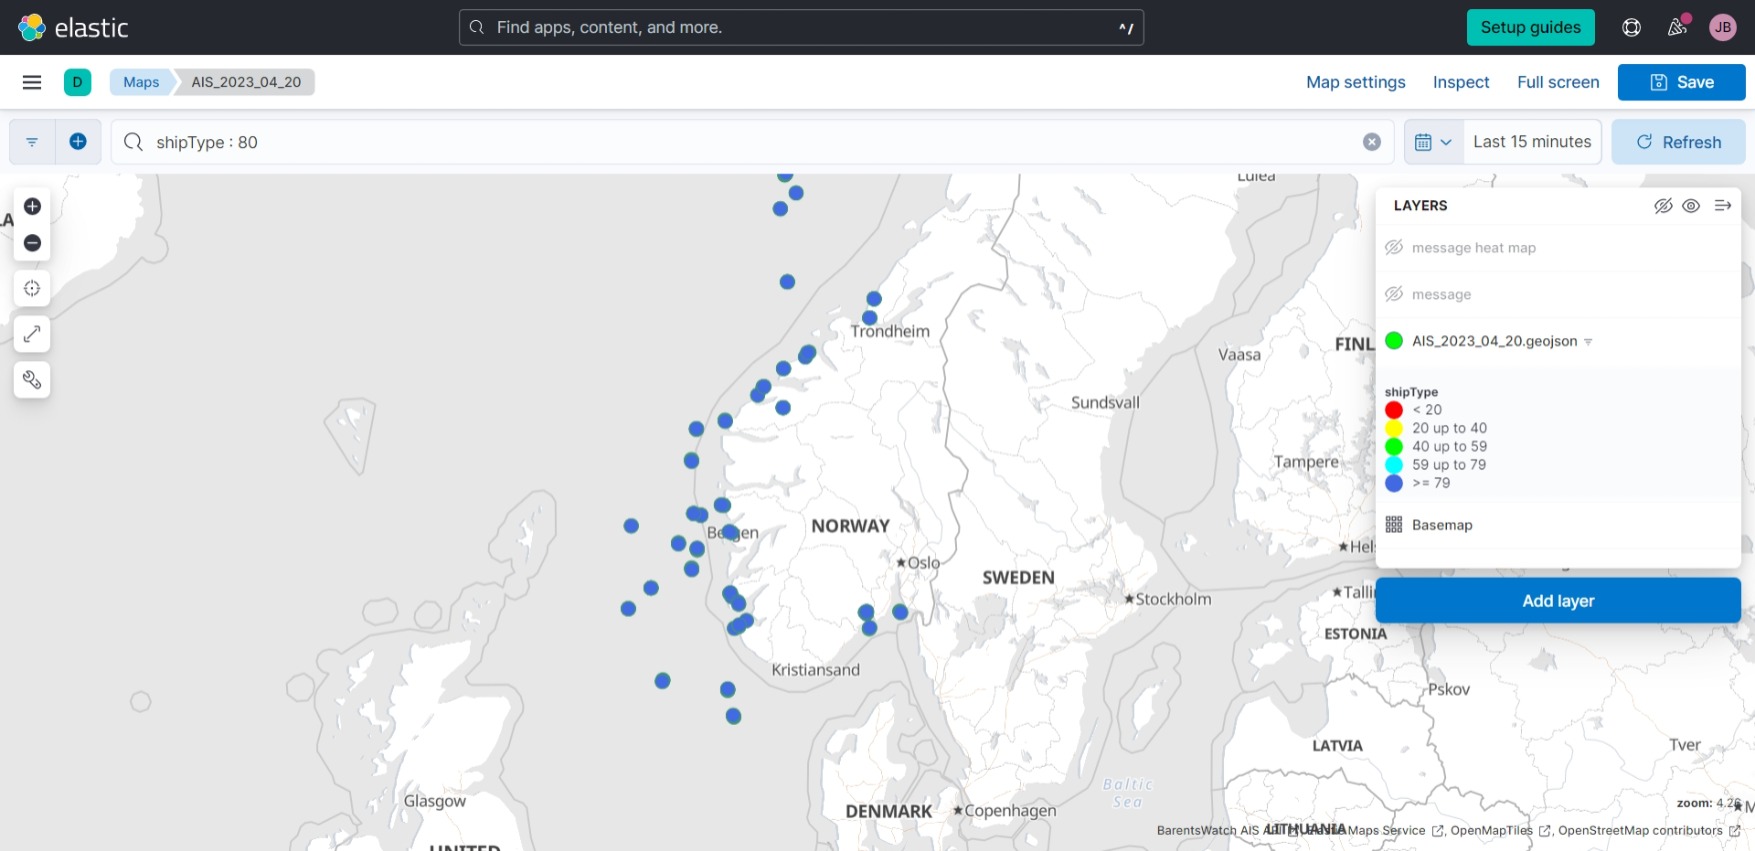 Filtering to tankers in AIS_2023_04_20.geojson